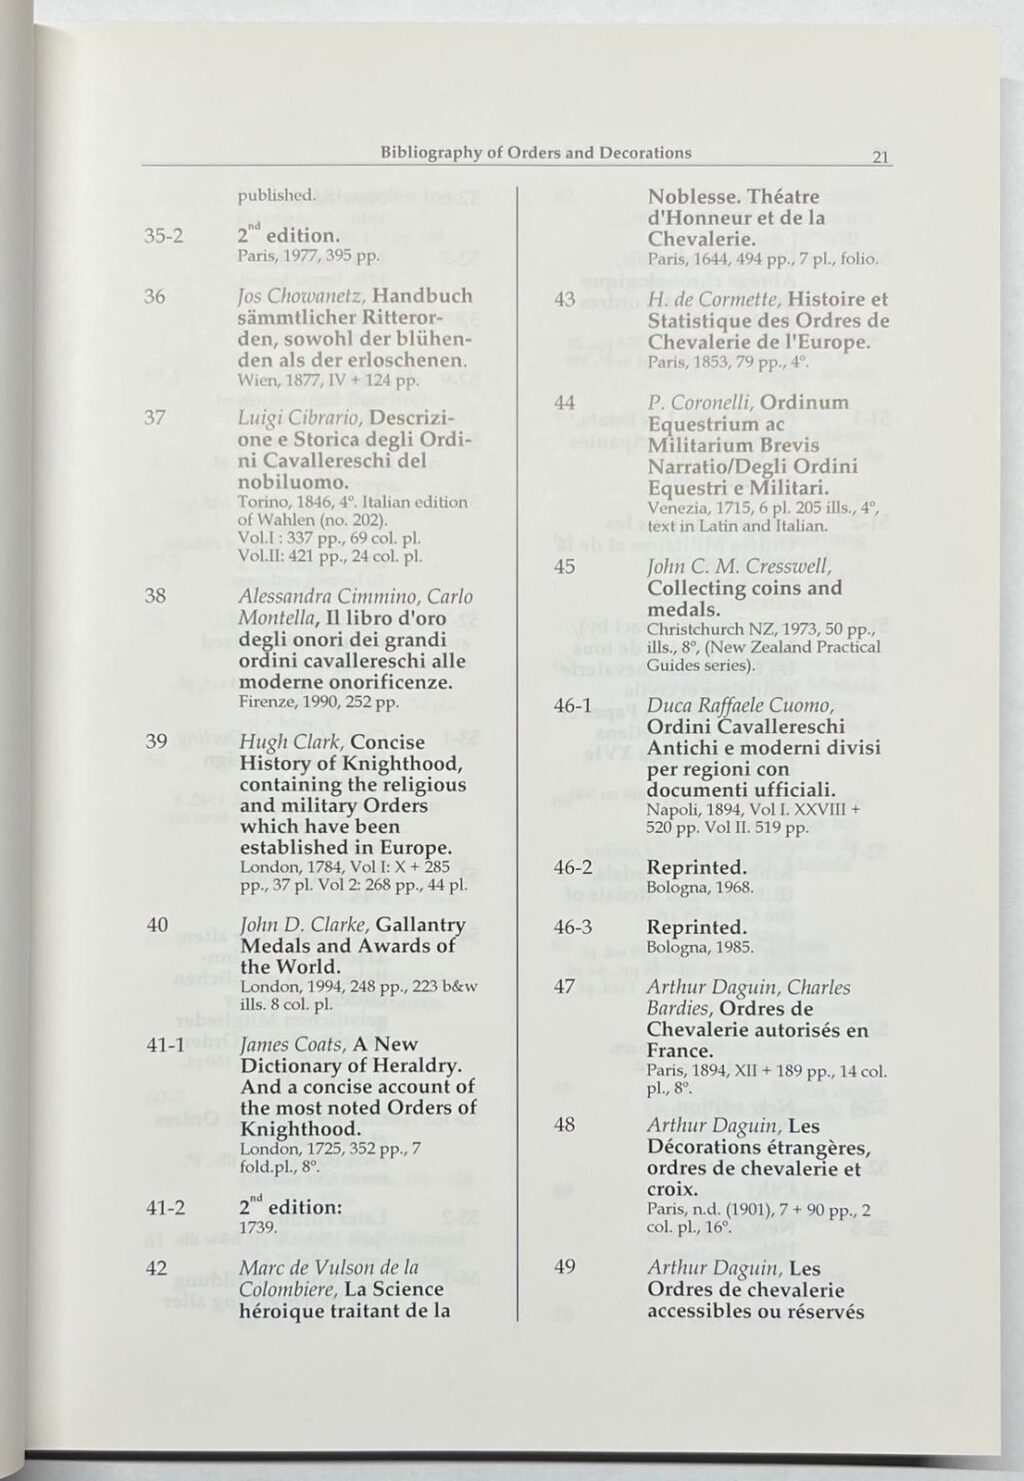 Numismatics, 1999, Medals | Bibliography of Orders and Decorations, Odense: Odense University Press, 1999, 321 pp.